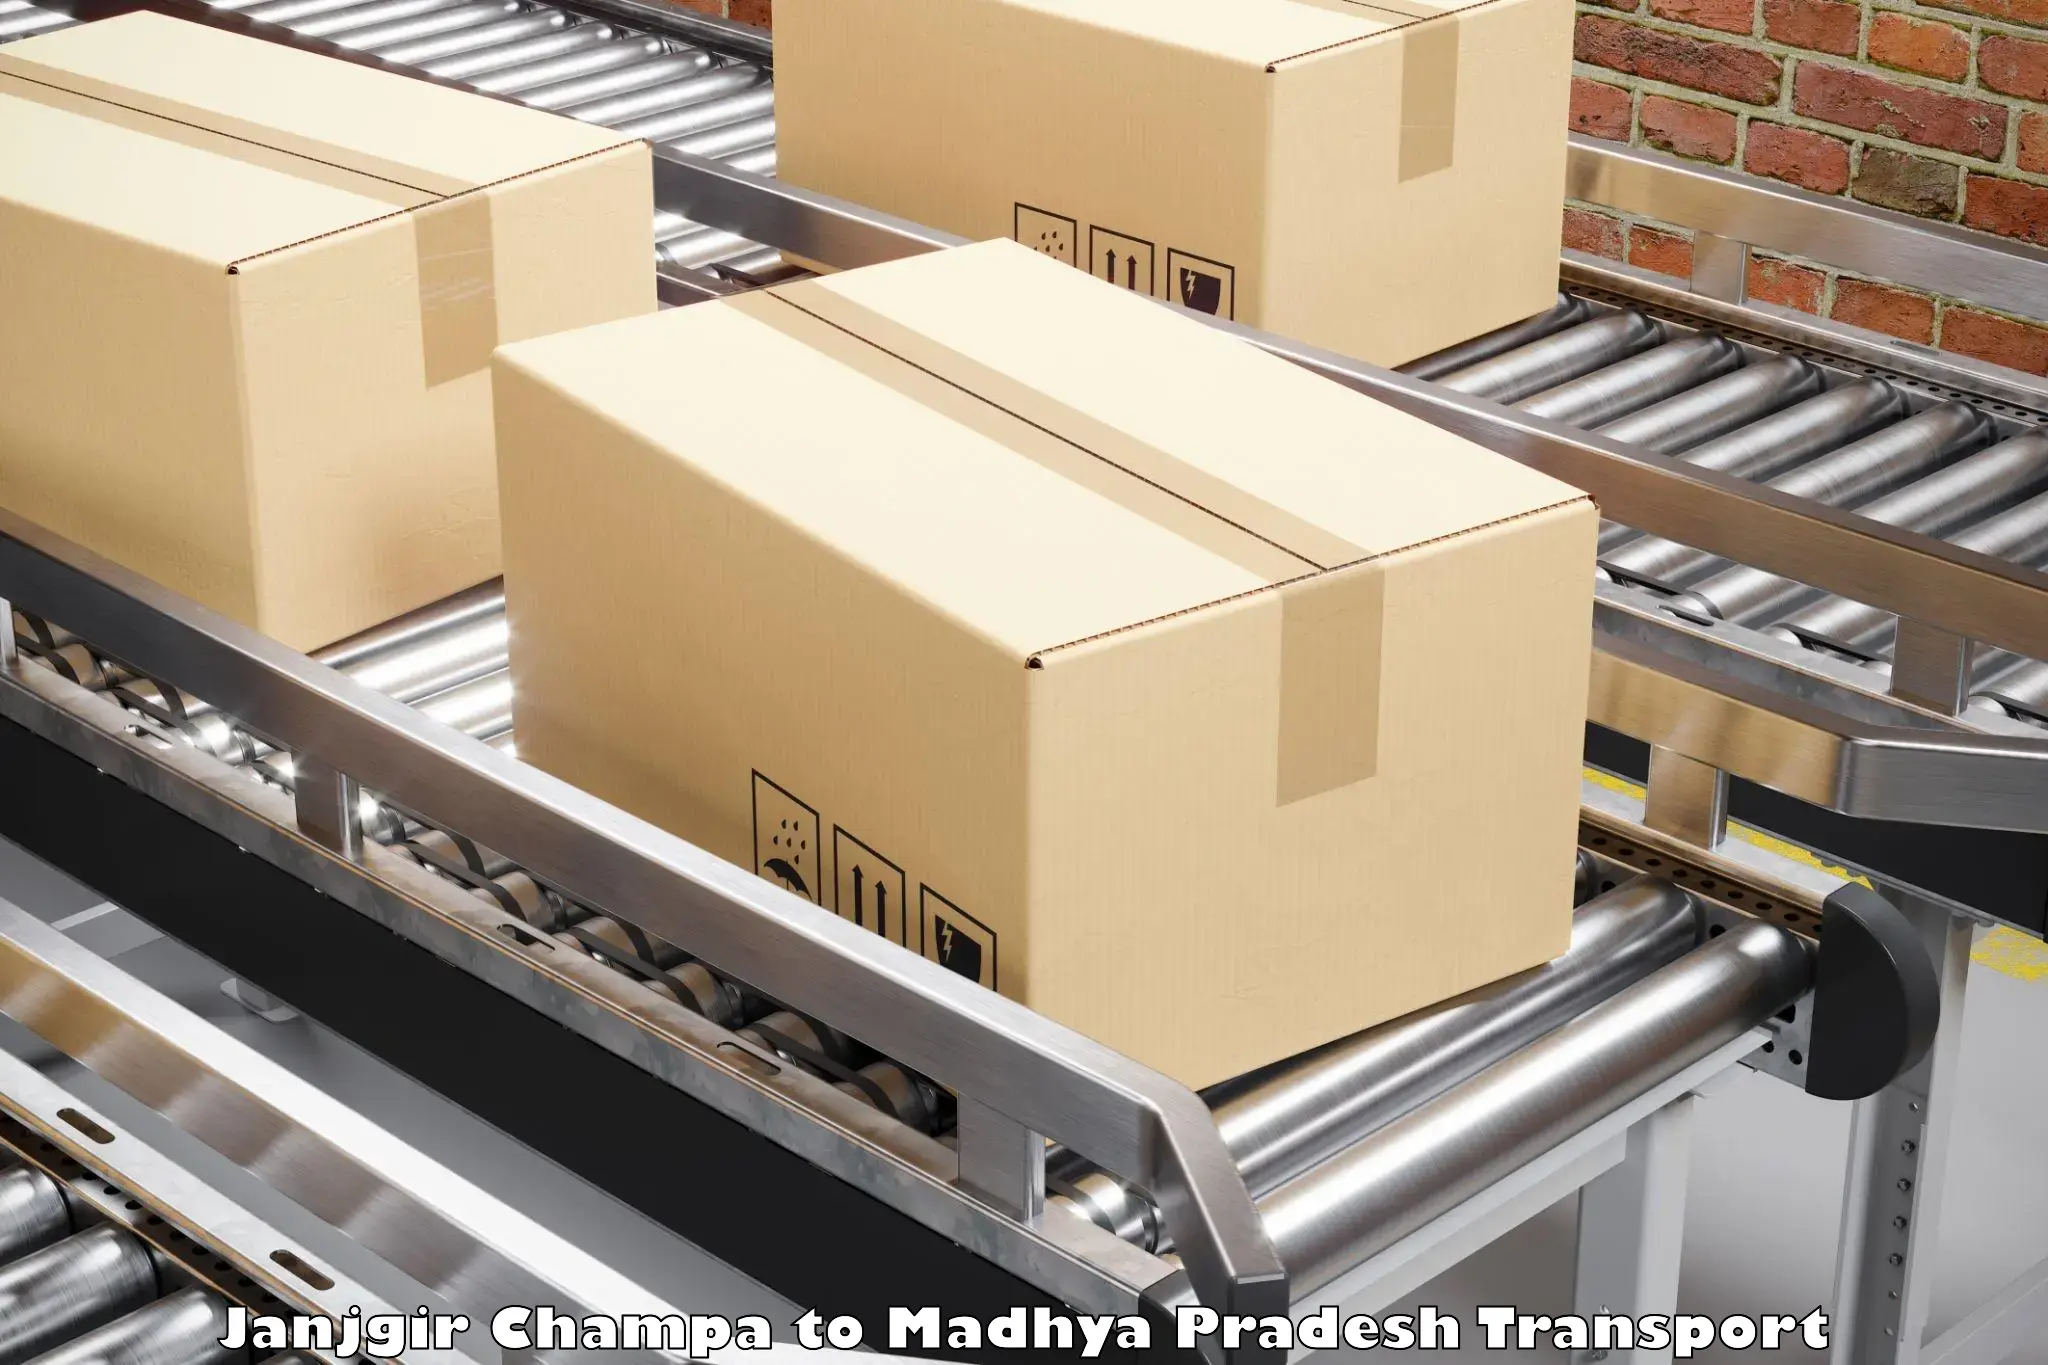 Daily parcel service transport Janjgir Champa to IIT Indore